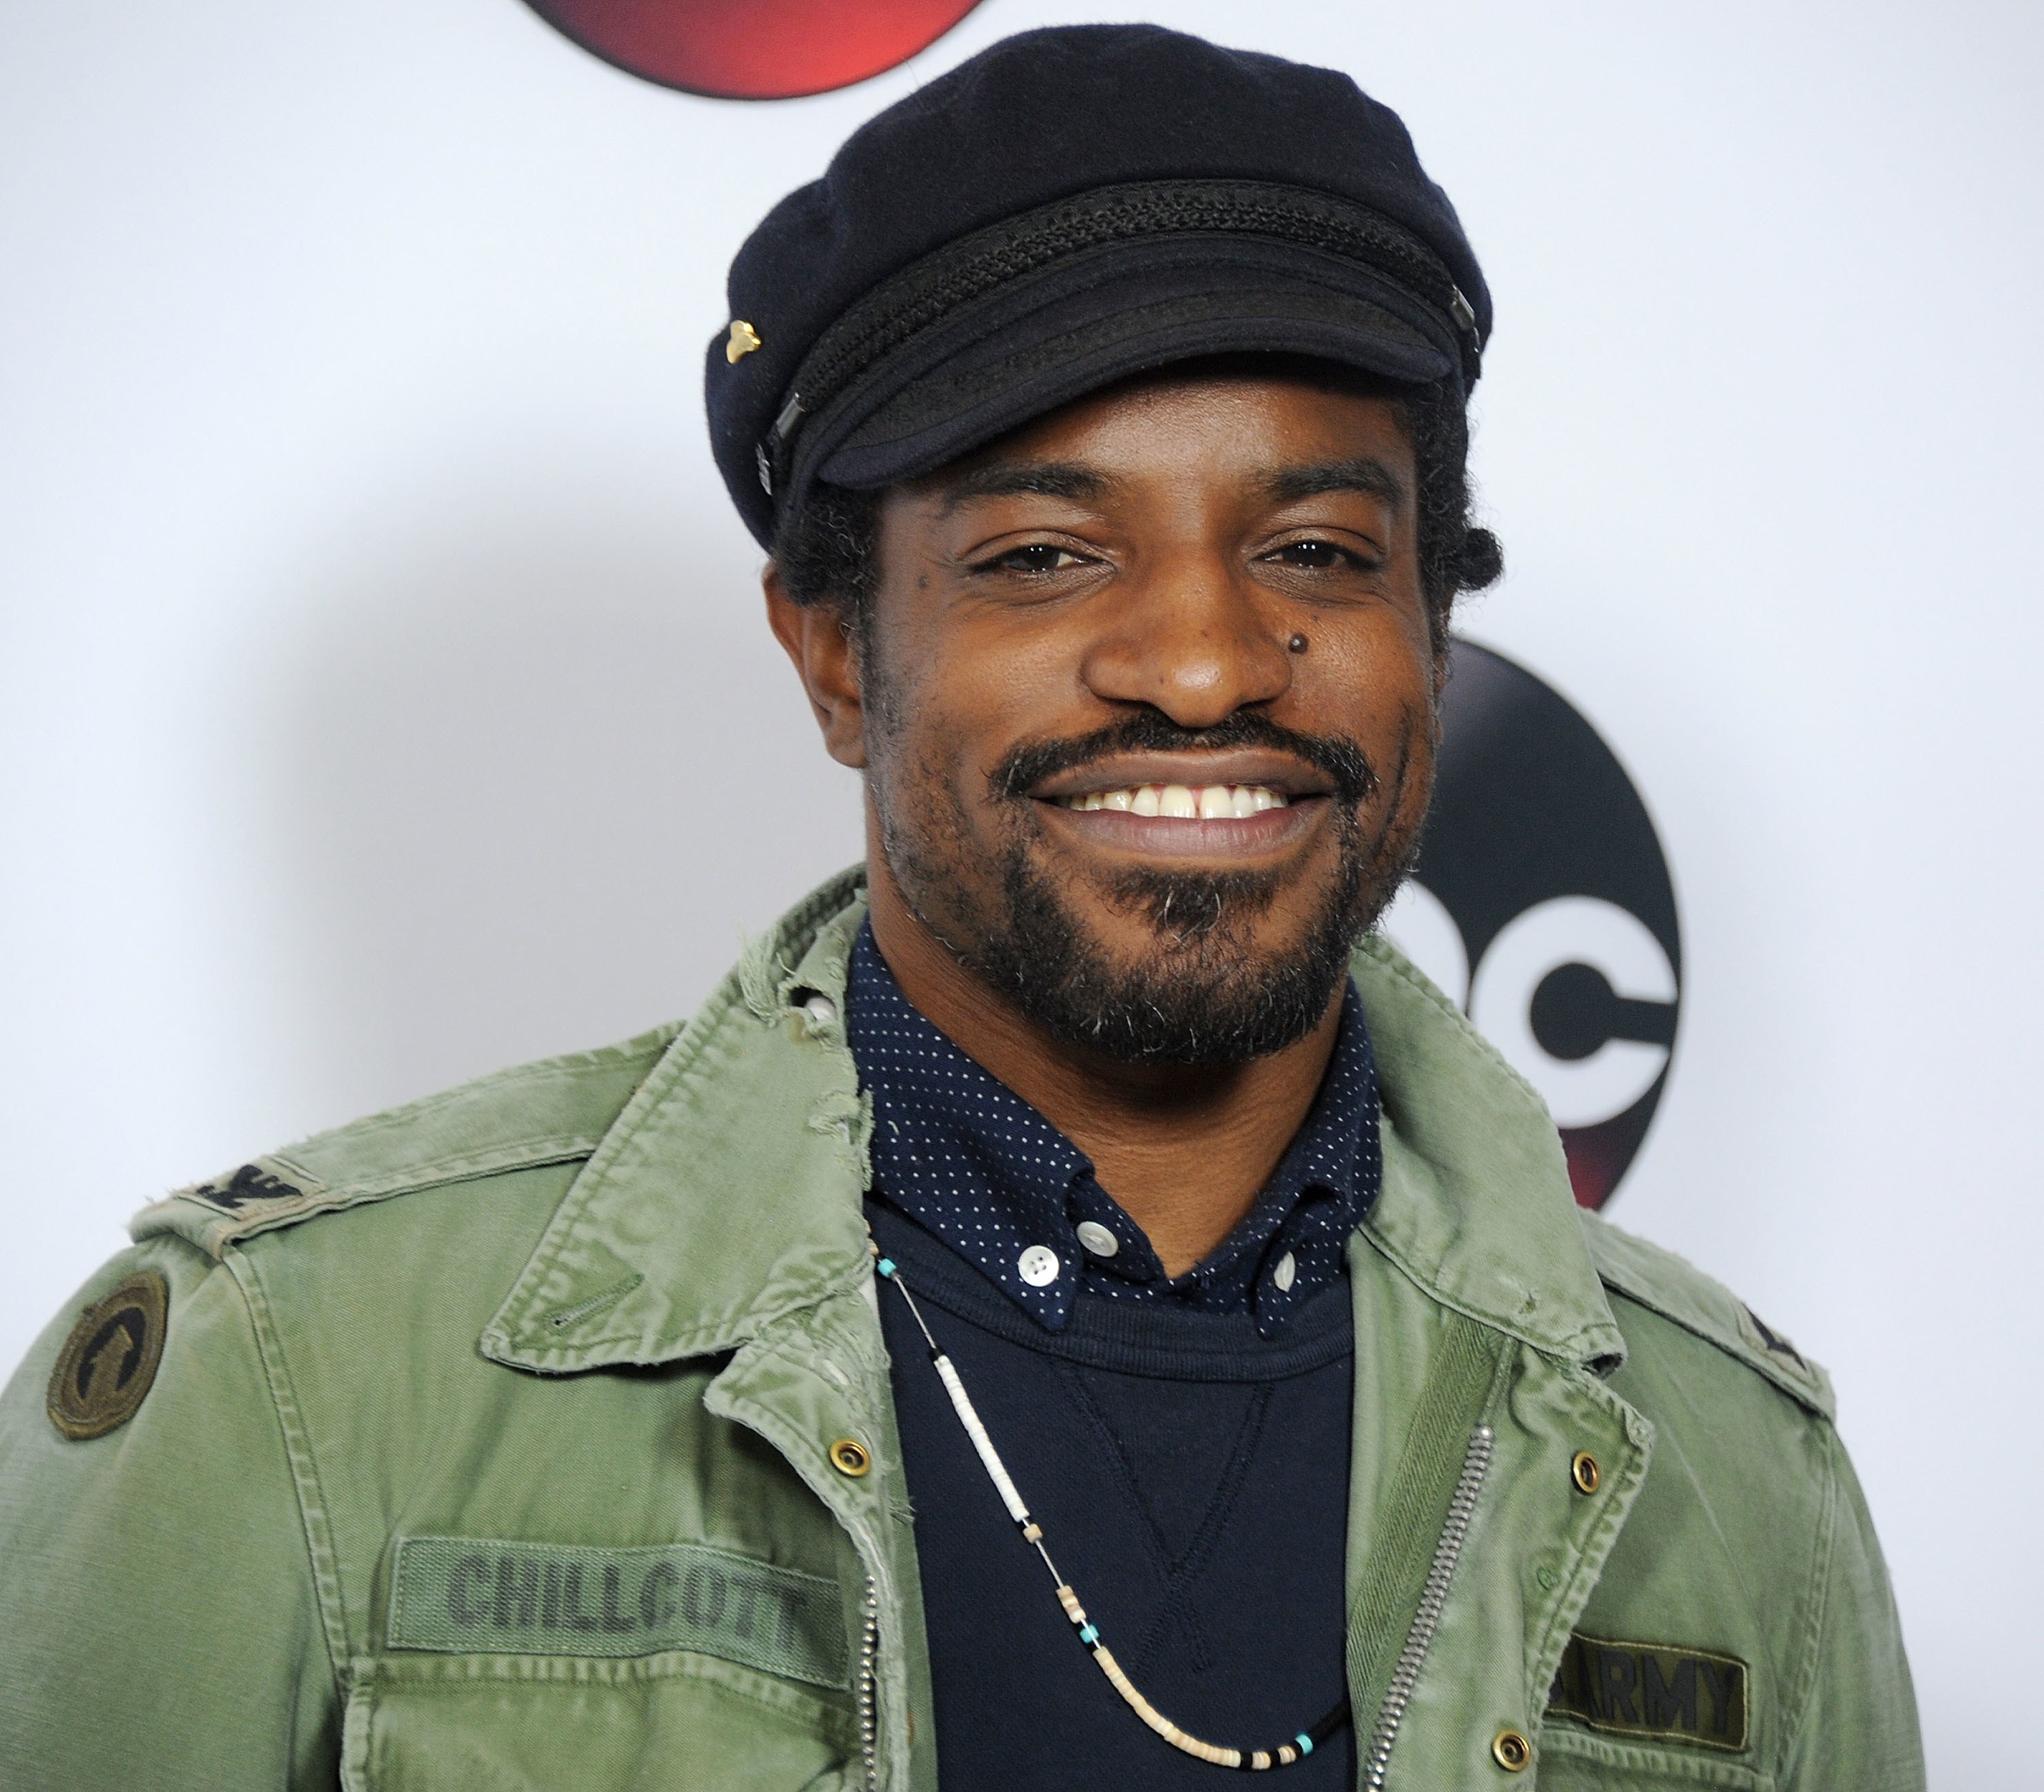 Andre 3000 Rocks Out As Jimi Hendrix  WHATS HOT IN HIP HOP COMMUNITY